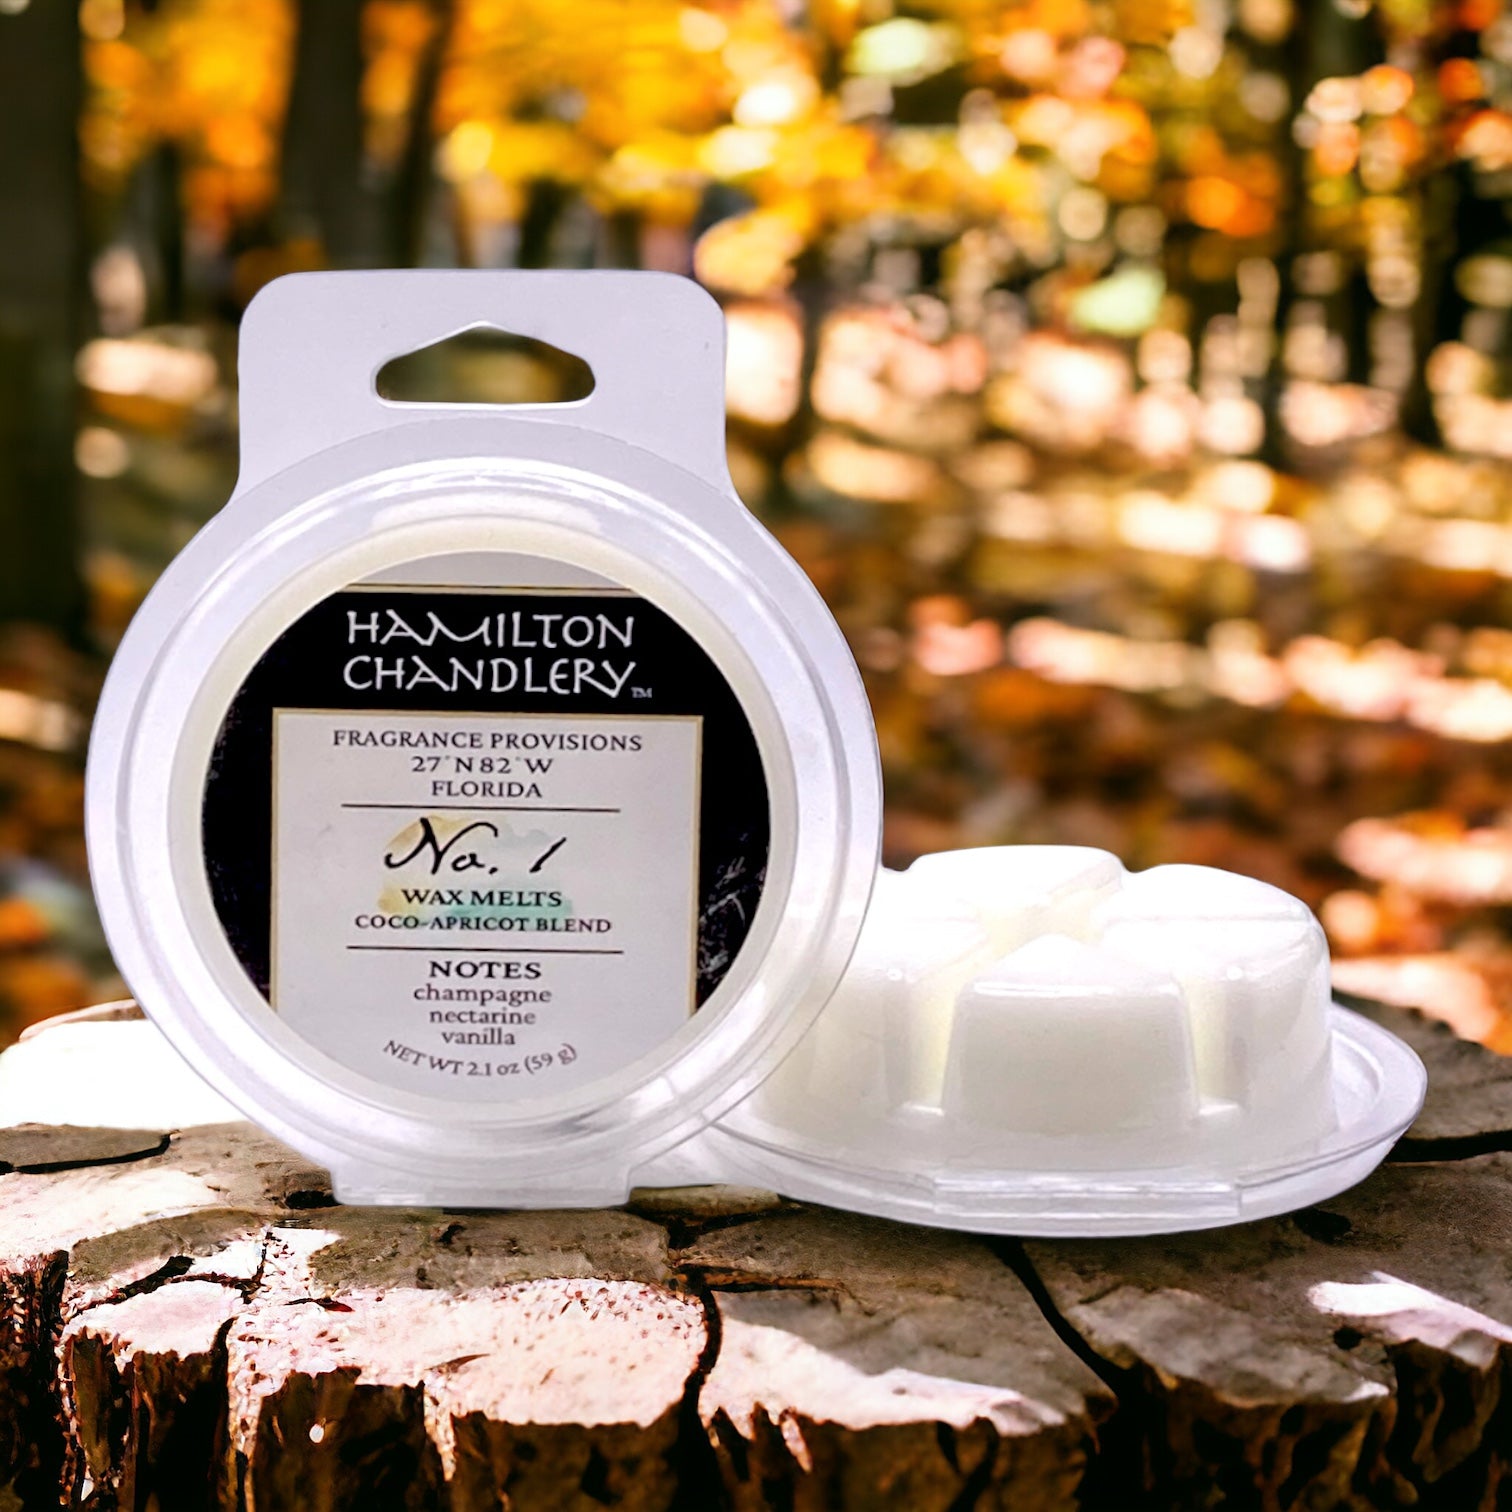 Fragrance No. 1 Wax Melts on Wood Stump in Forest Background | Hamilton Chandlery